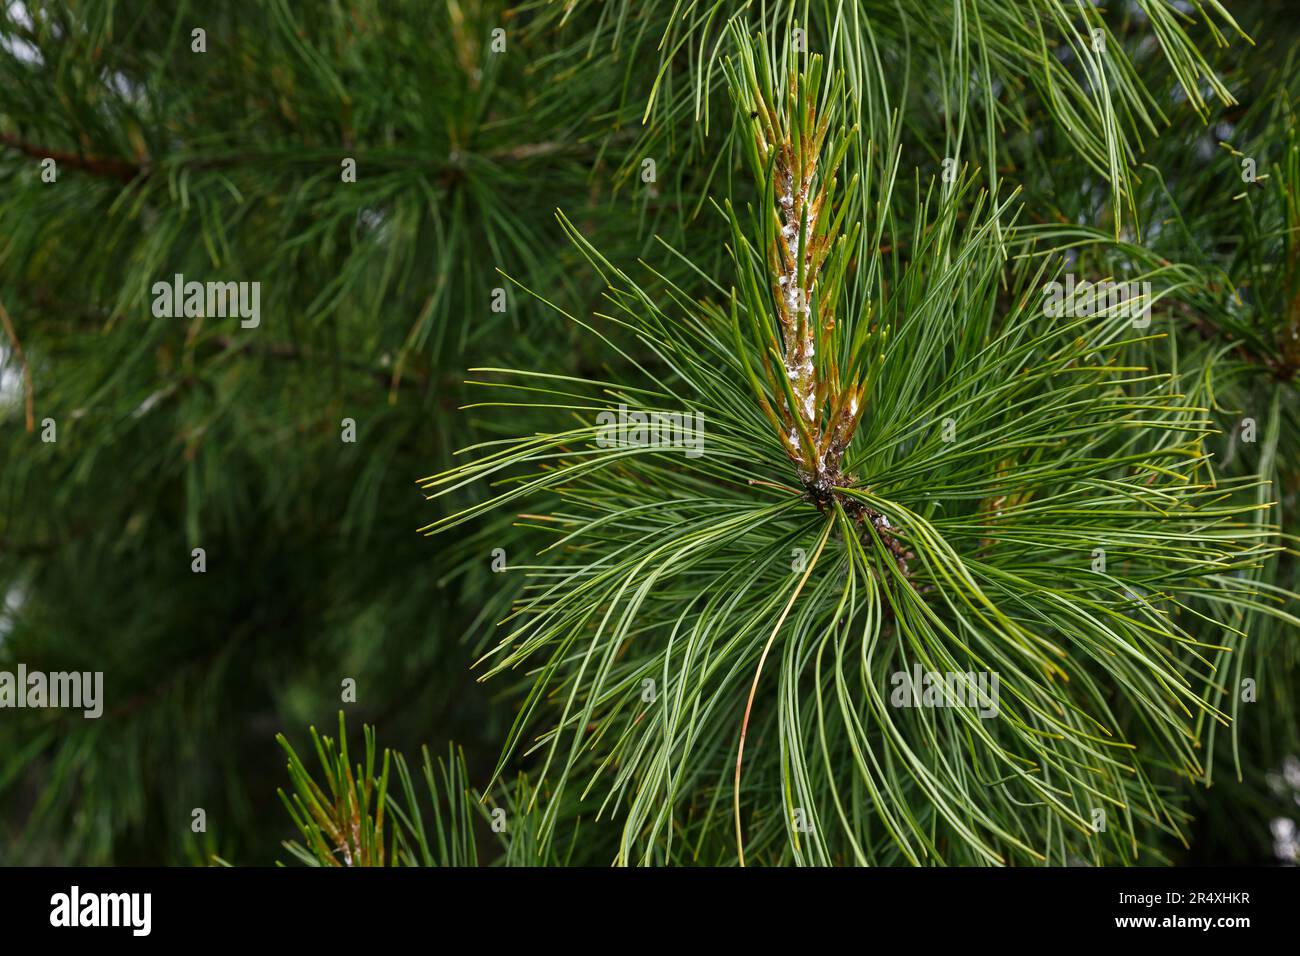 Siberian pine tree branch with green needles close-up. Nature background Stock Photo